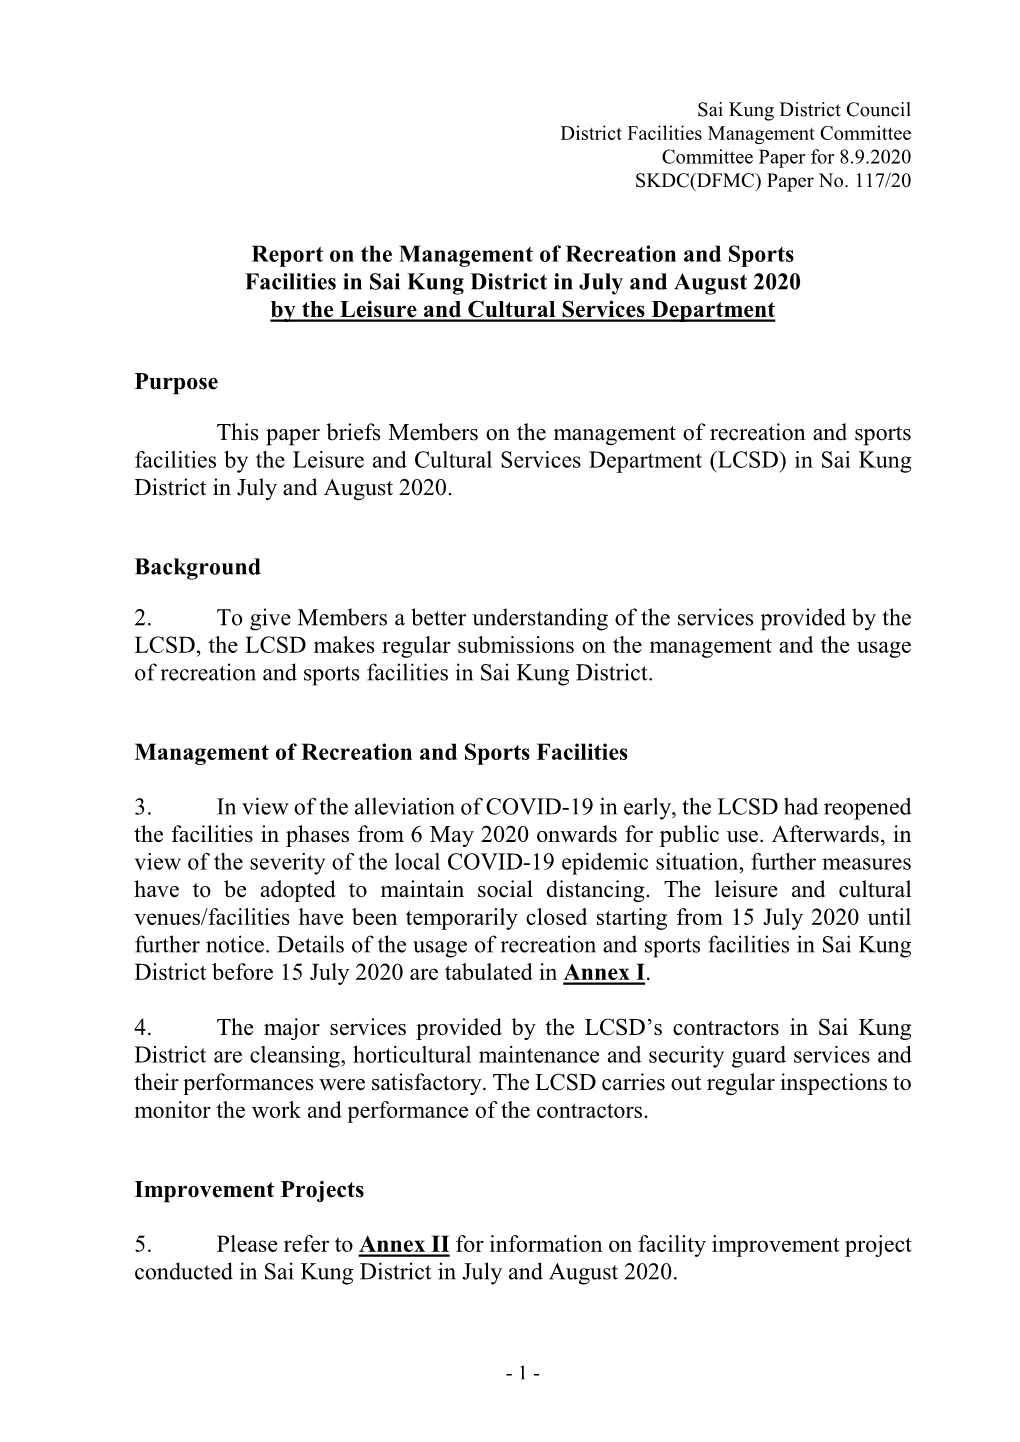 Report on the Management of Recreation and Sports Facilities in Sai Kung District in July and August 2020 by the Leisure and Cultural Services Department